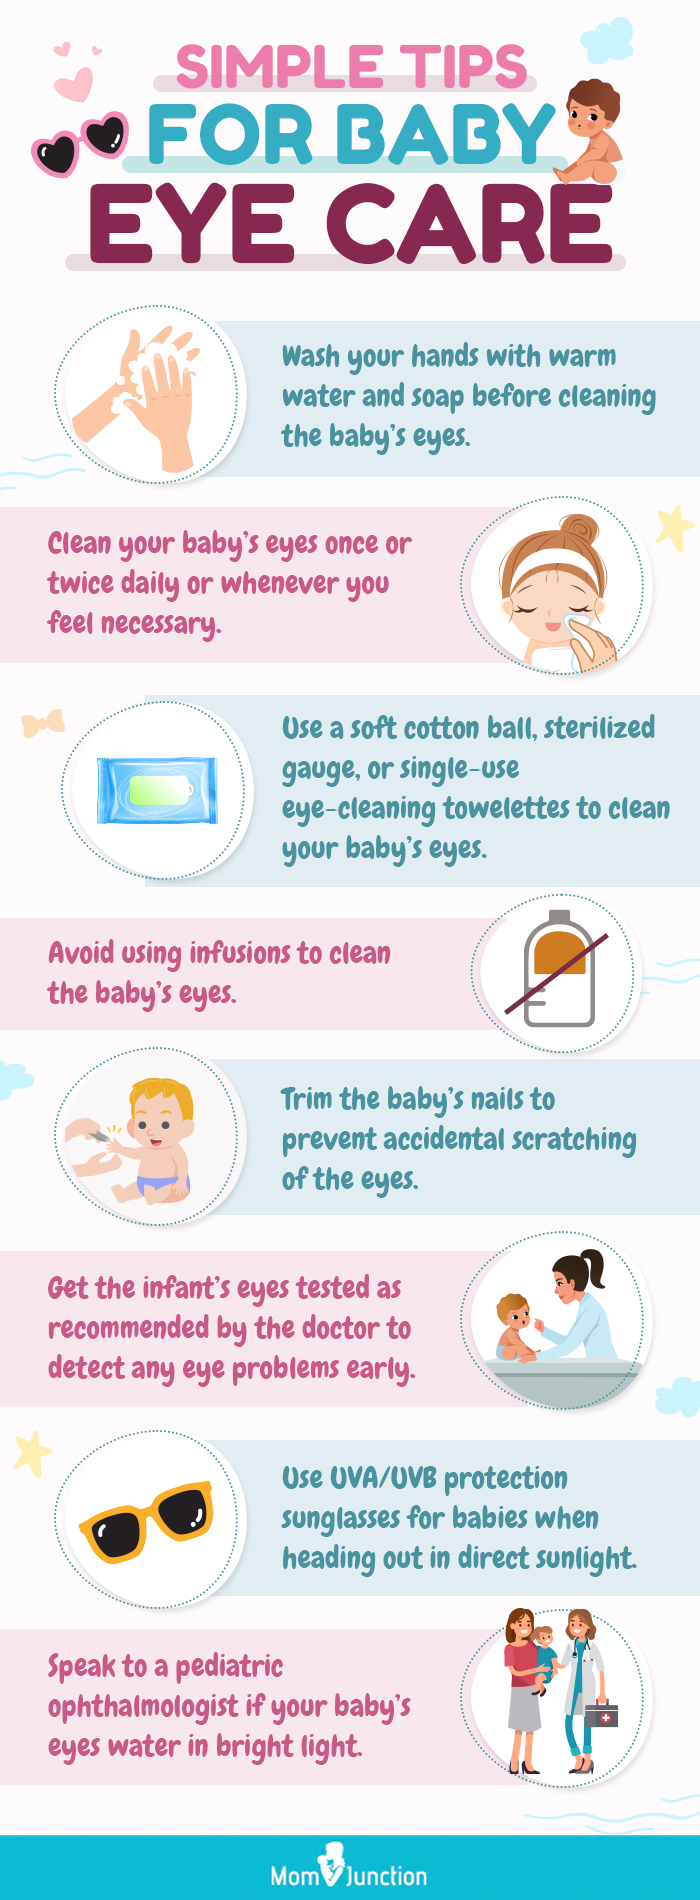 simple tips for baby eye care (infographic)